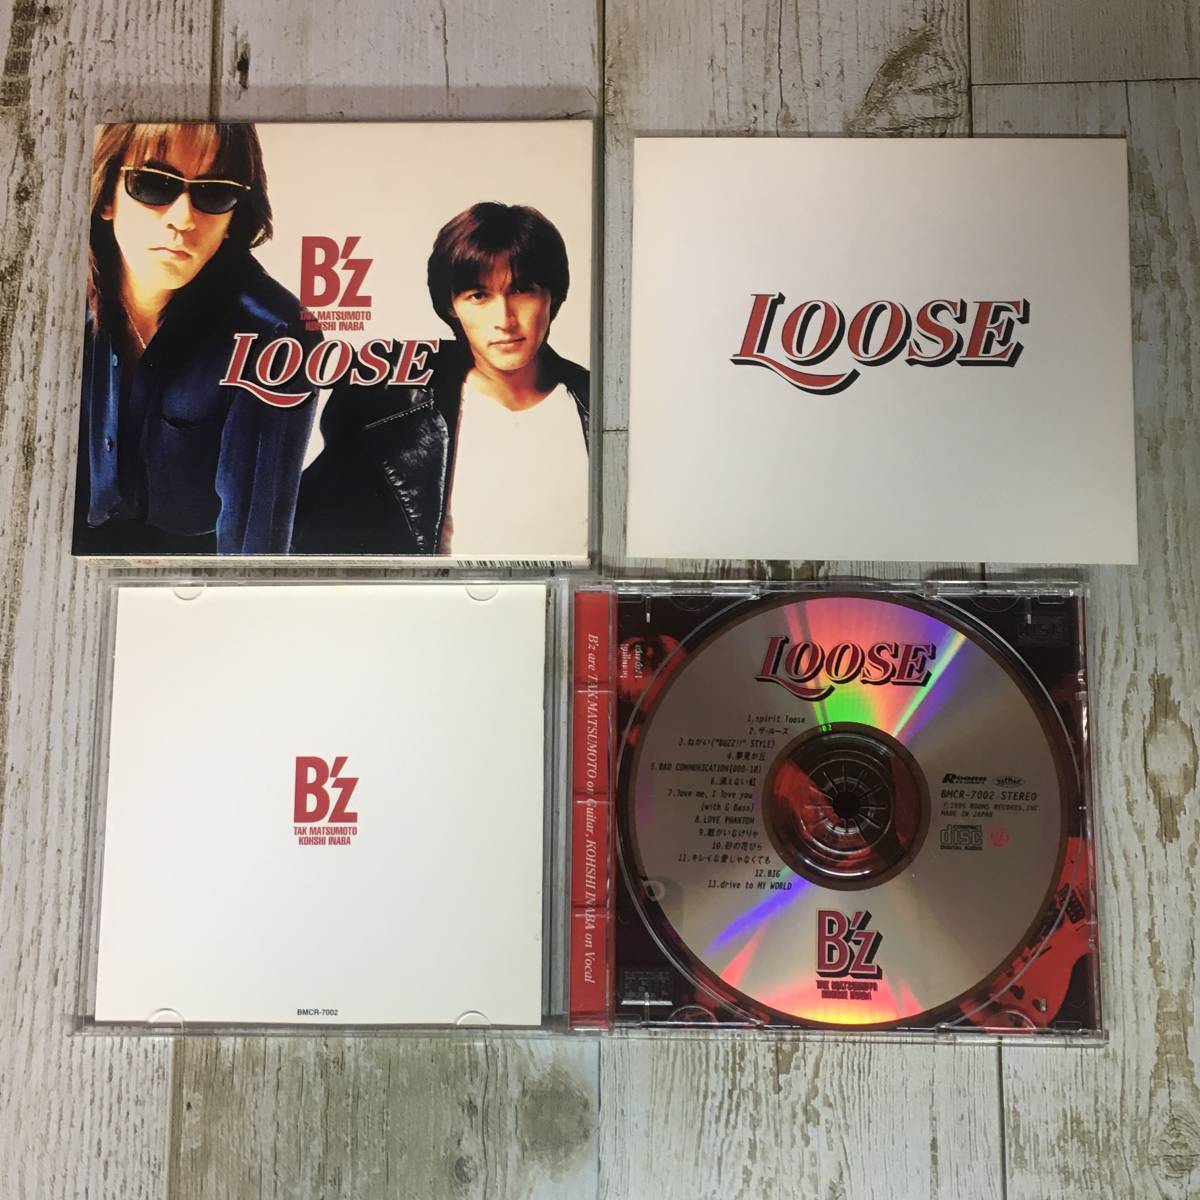 Mg0121 (中古CD)B'z 7枚セット: IT’S SHOWTIME!! / GO FOR IT,BABY / WICKED BEAT / LOOSE / Brotherhood / The Best Pleasure / Treasure_LOOSE